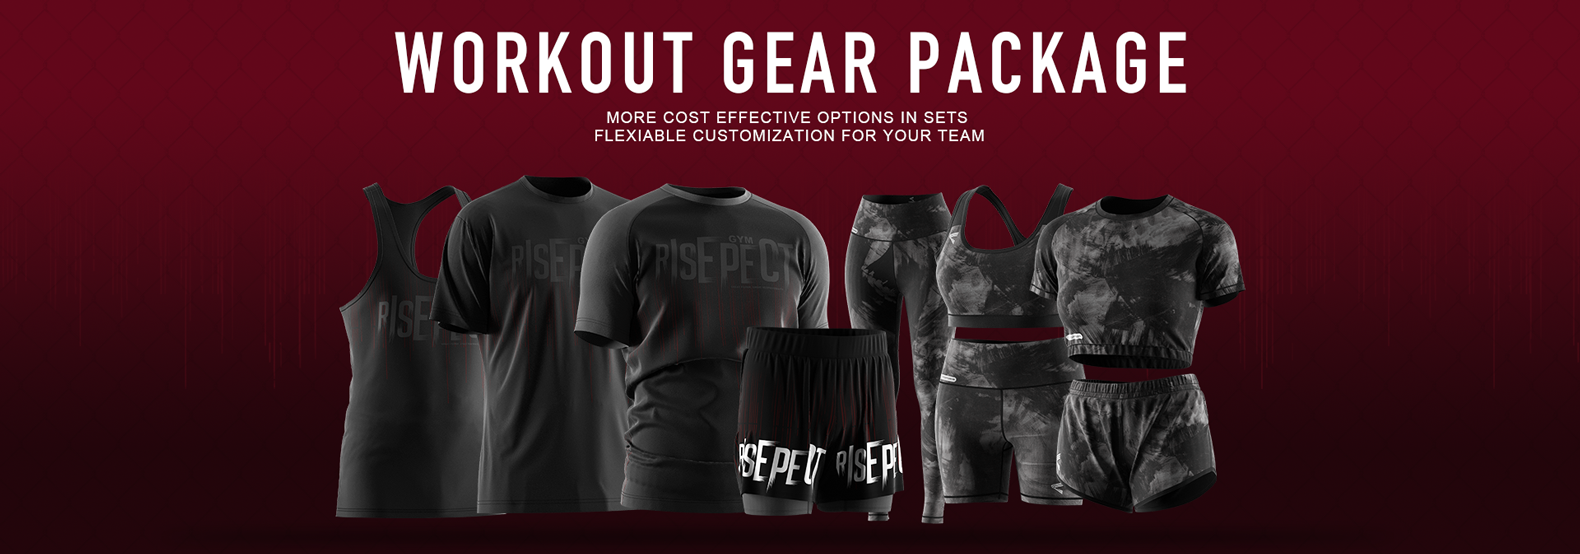 Workout Gear Package (banner)